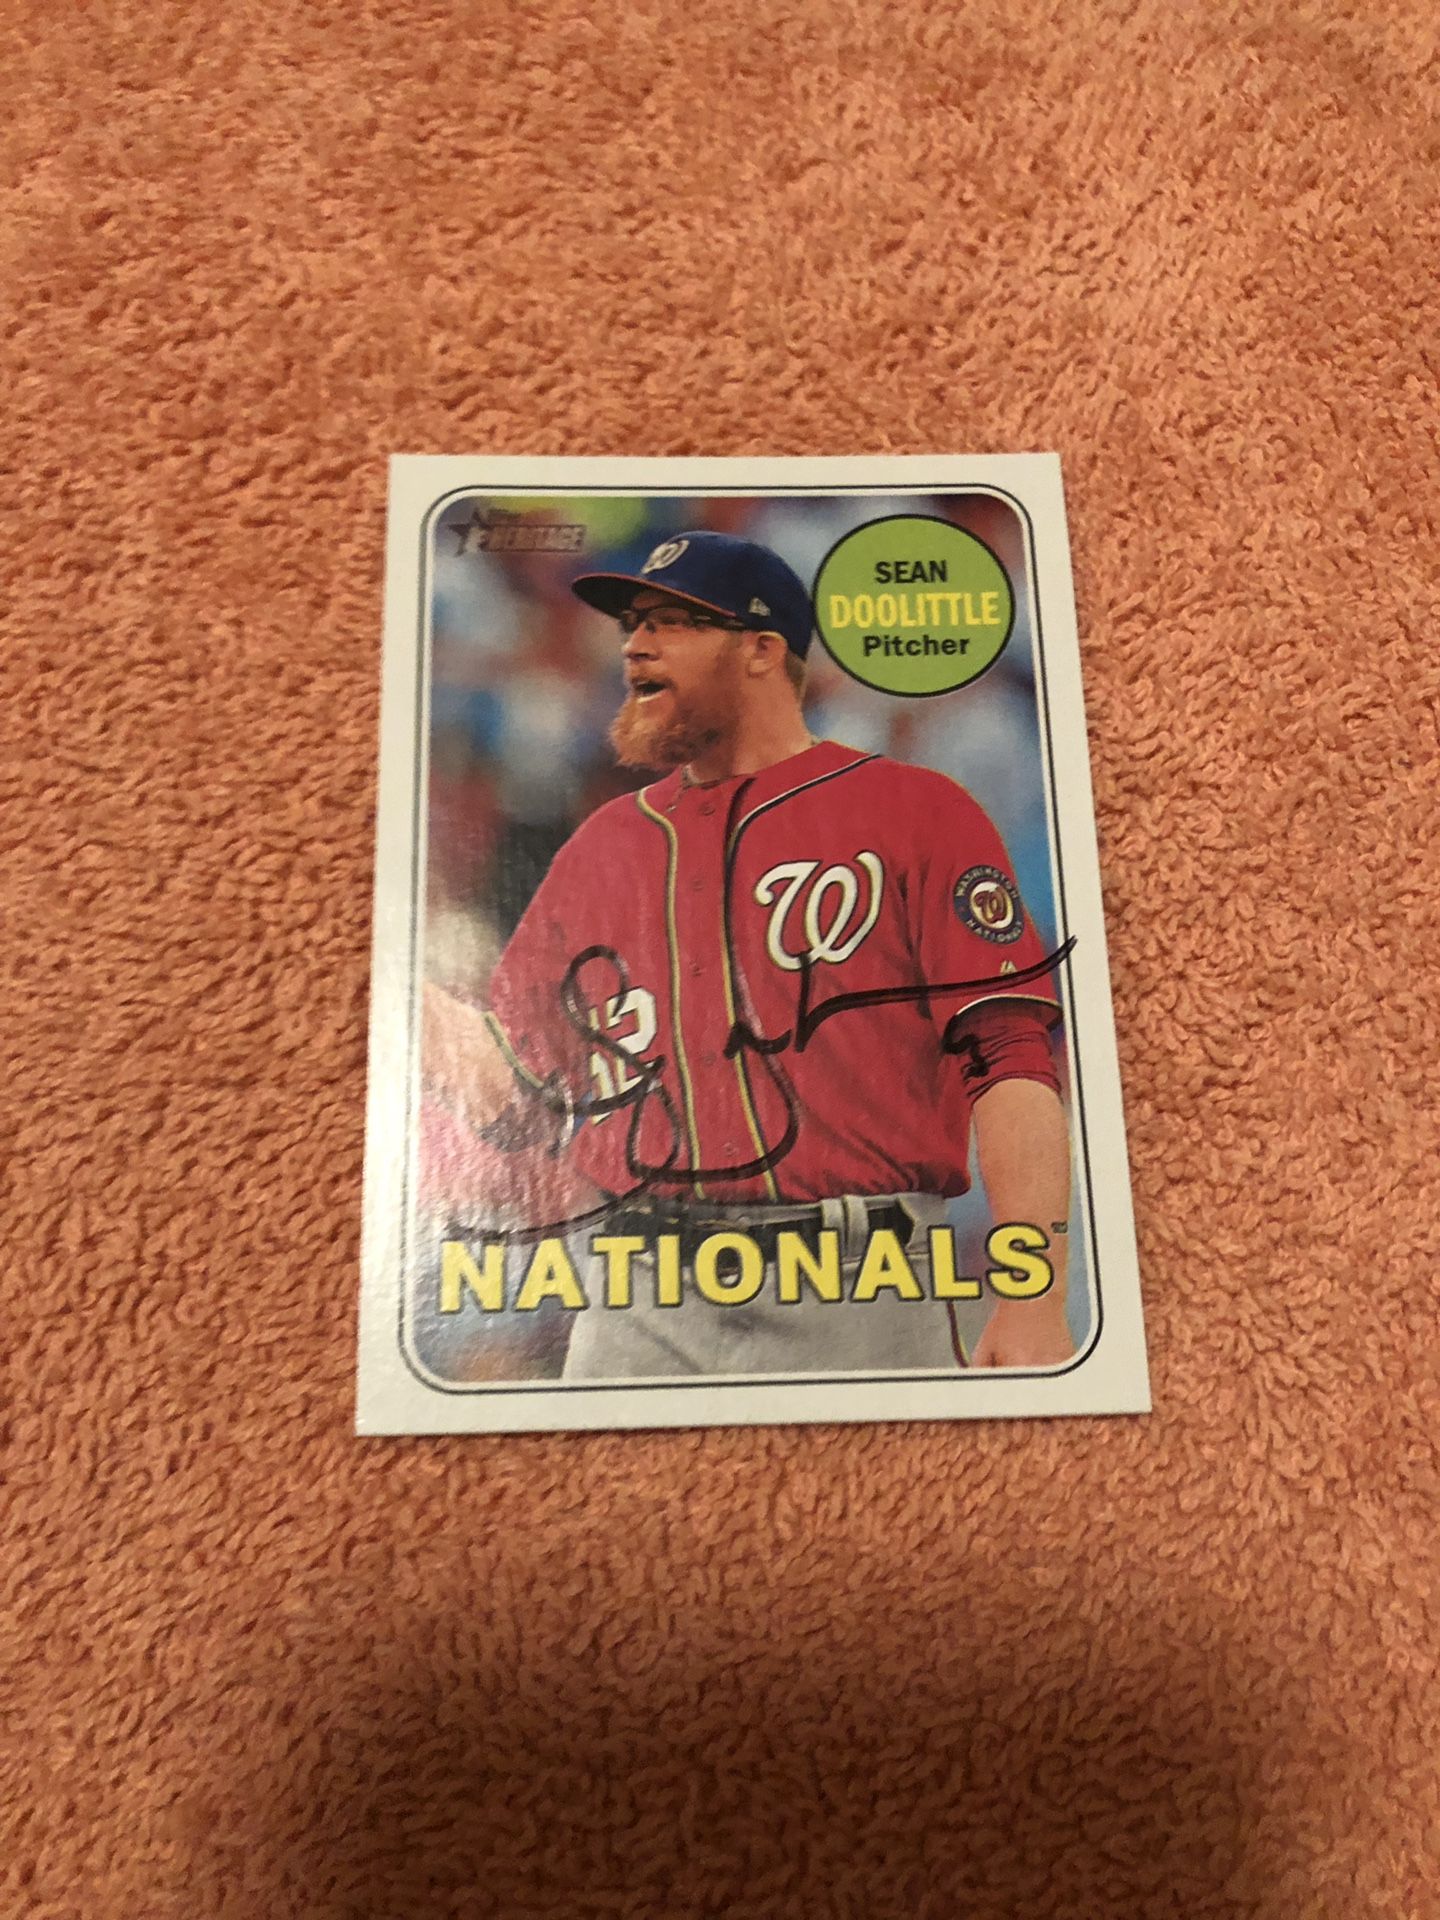 Sean Doolittle Autographed TOPPS 2019 Heritage Baseball Card, Item comes with Certicate of Authenticity!